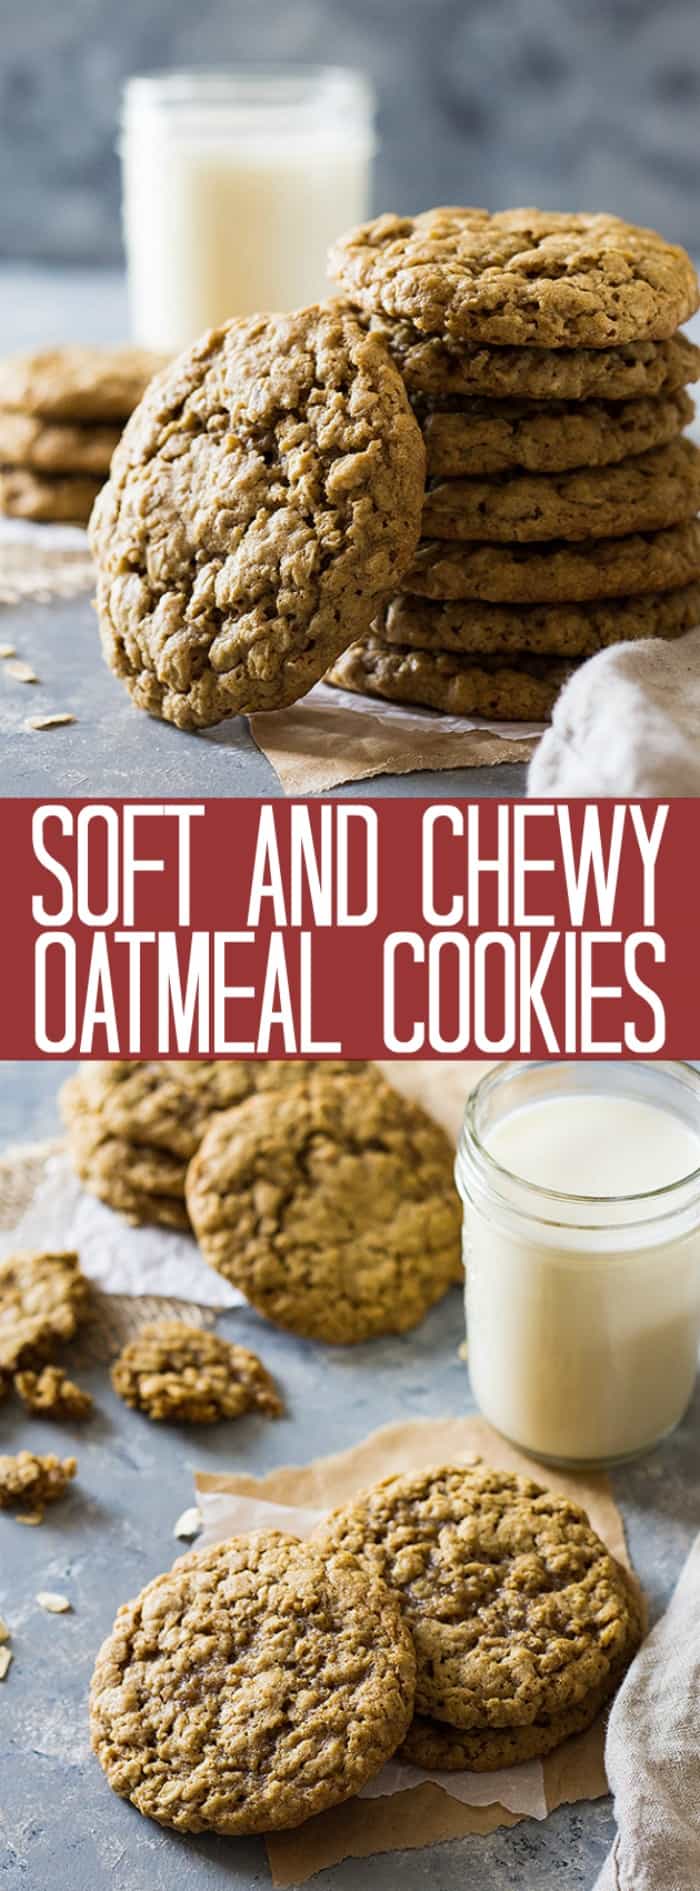 These Soft and Chewy Oatmeal Cookies are an all butter cookie that requires no chilling. They taste phenomenal and stay soft for days!